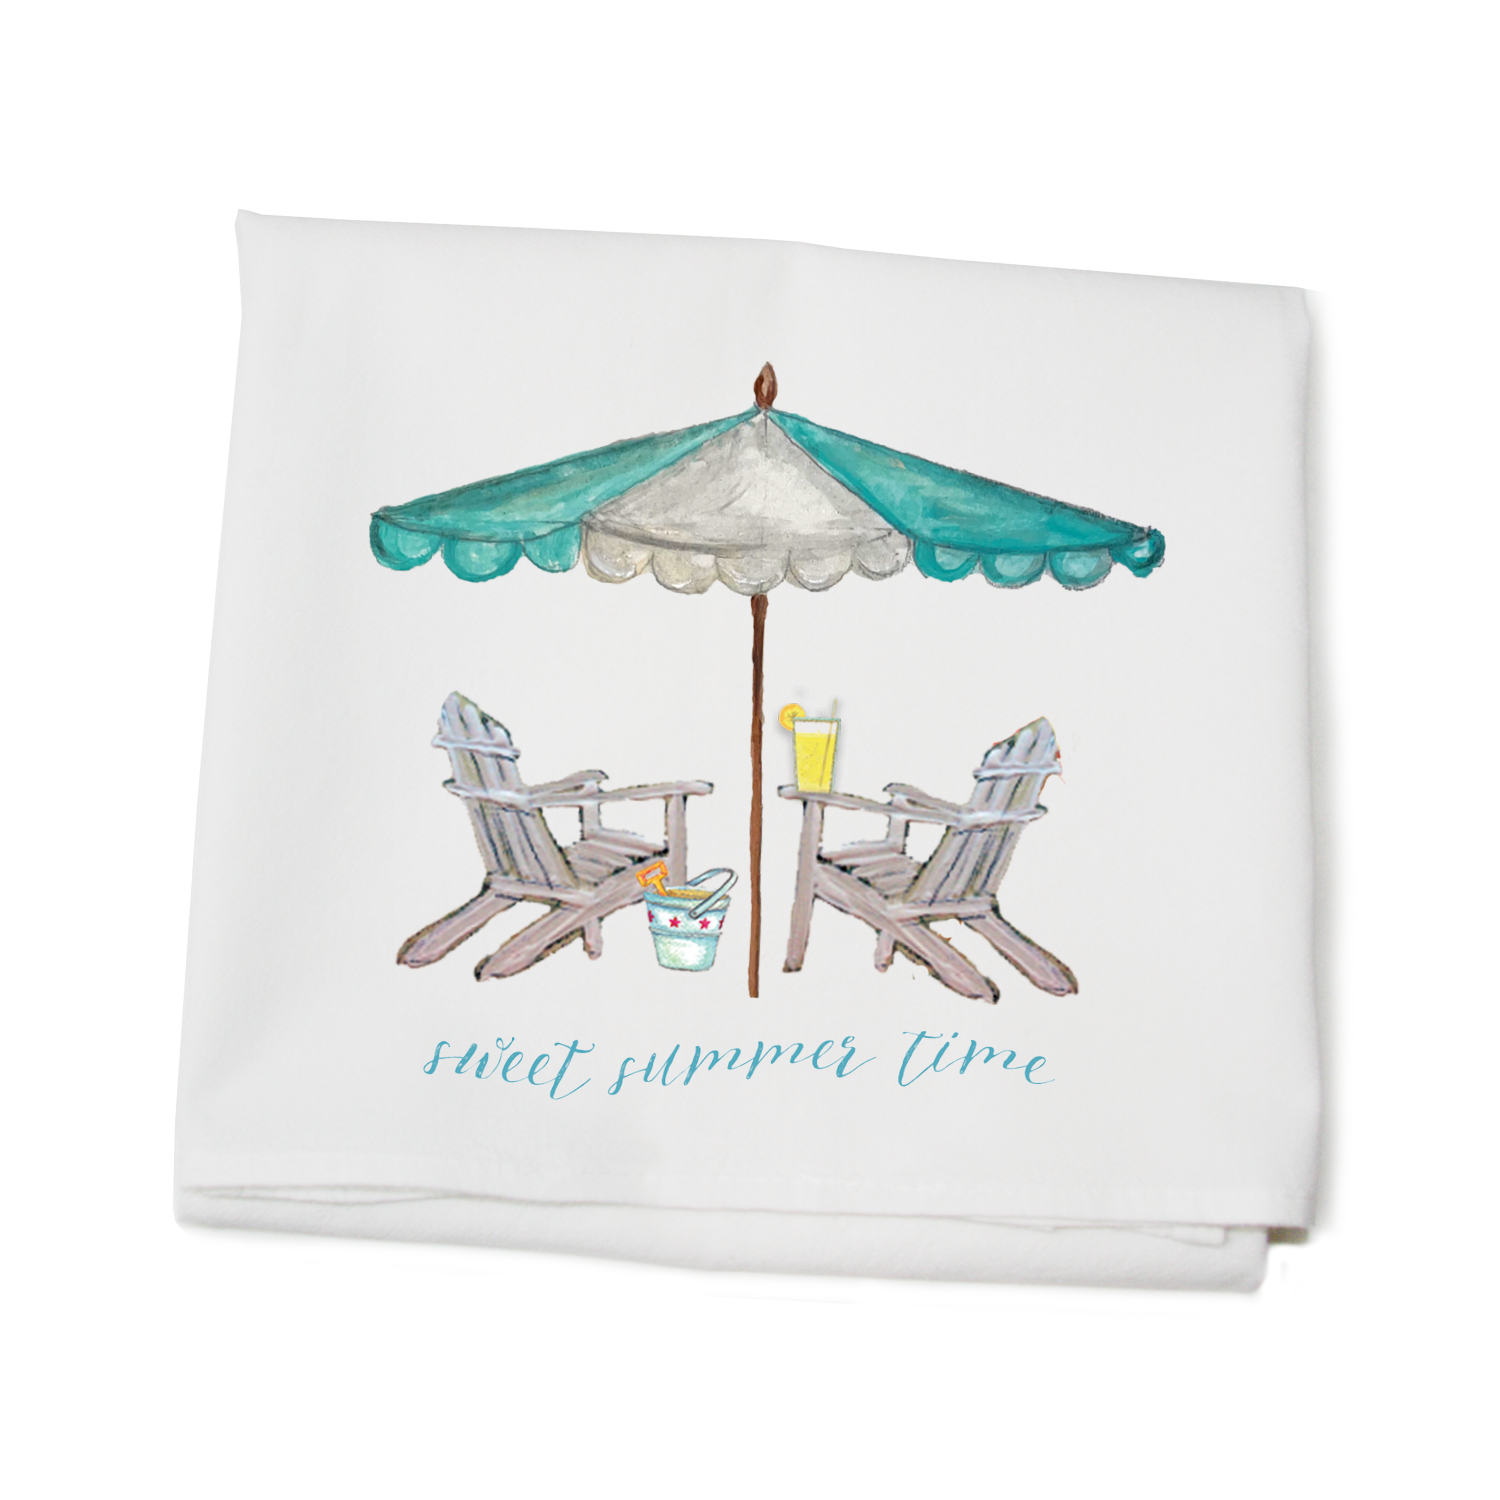 chairs with seafoam umbrella sweet summer time flour sack towel